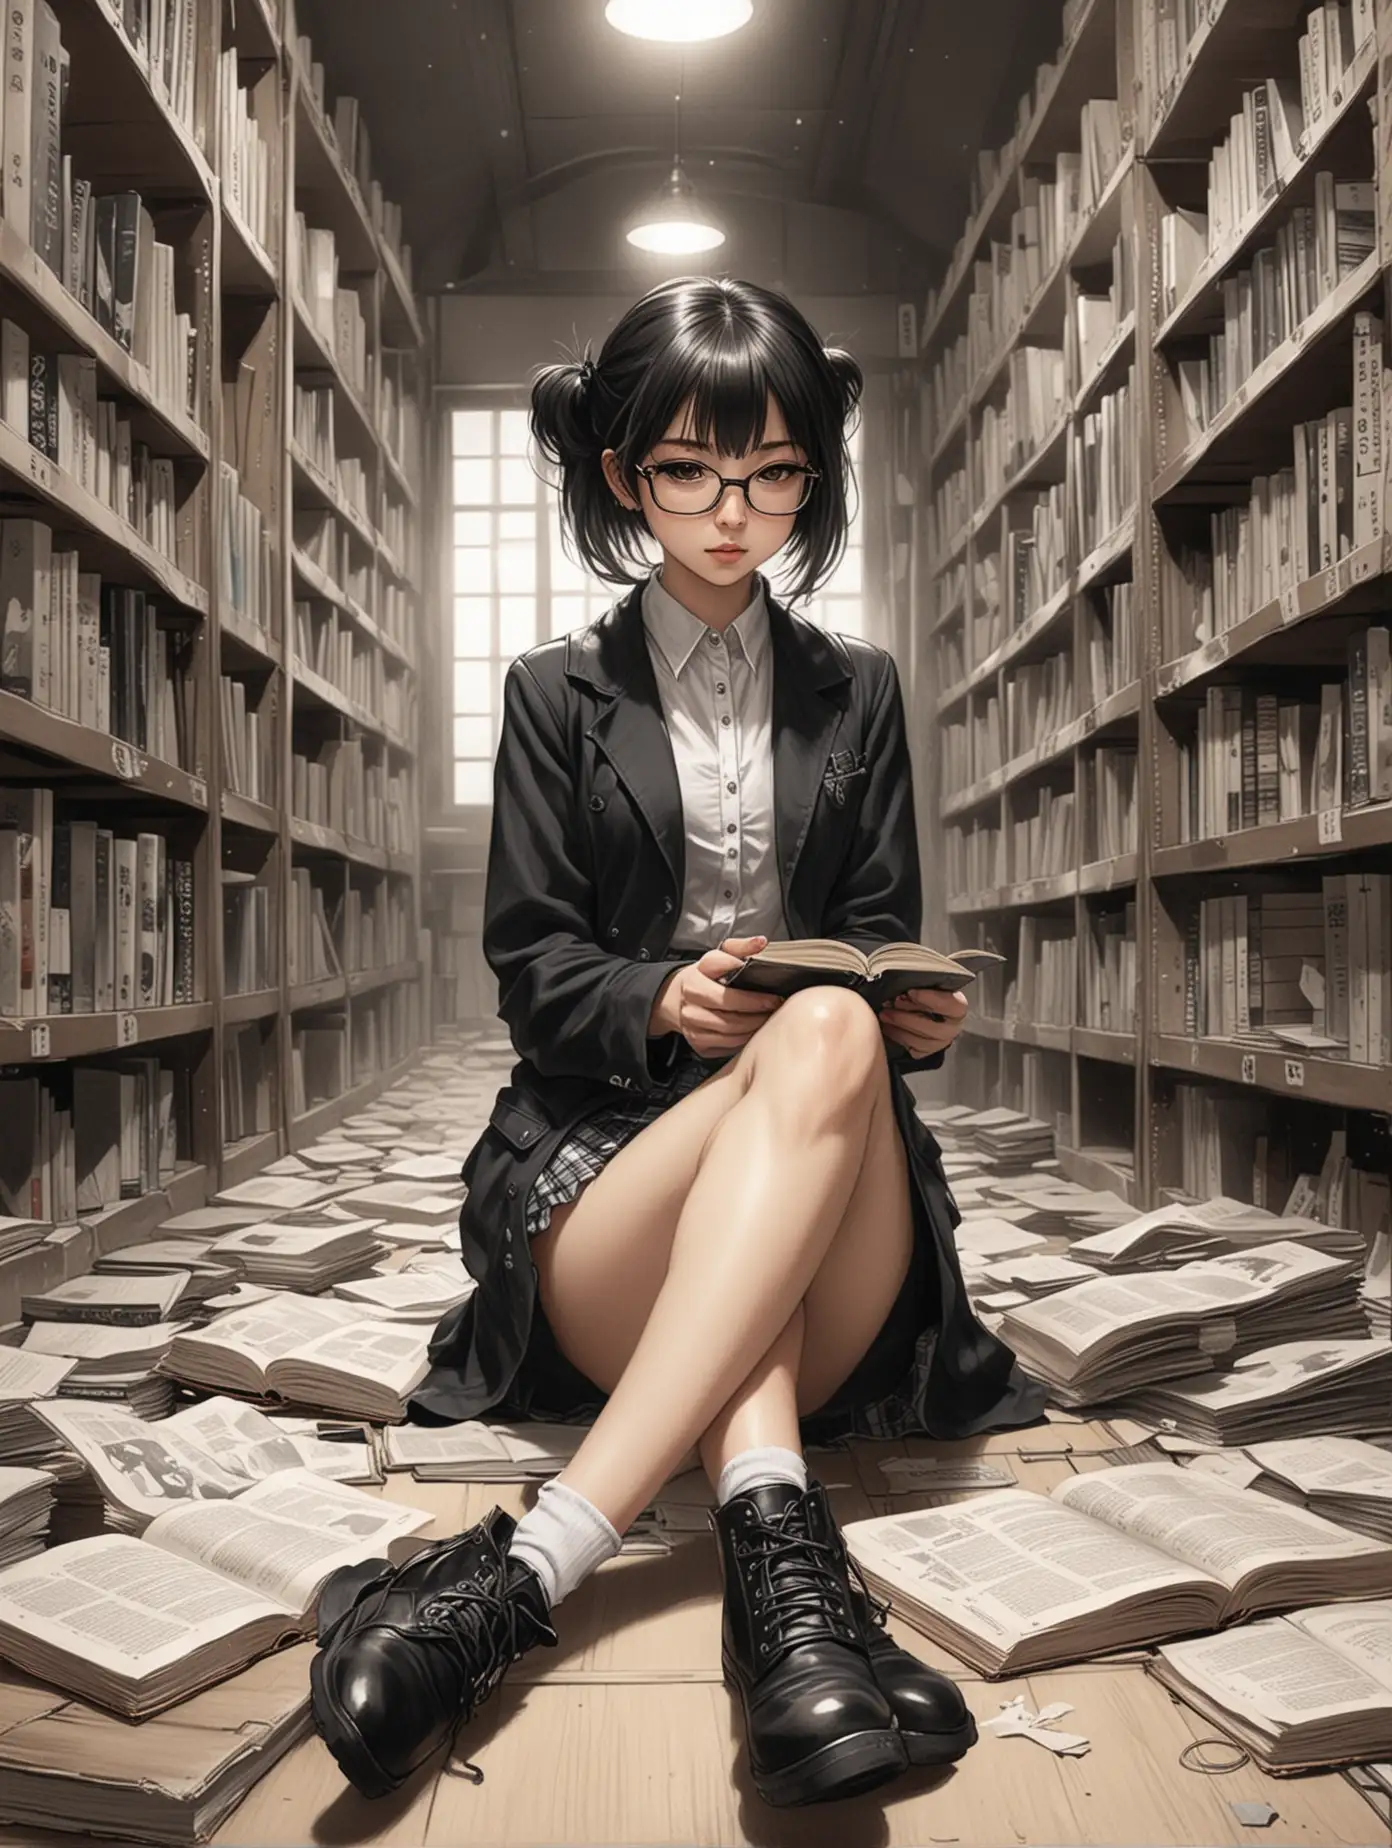 manga drawing of a fashionable pretty librarian Japanese girl, sitting on the floor and reading, in a narrow occult library annex in hell, punk but cute illustration,  